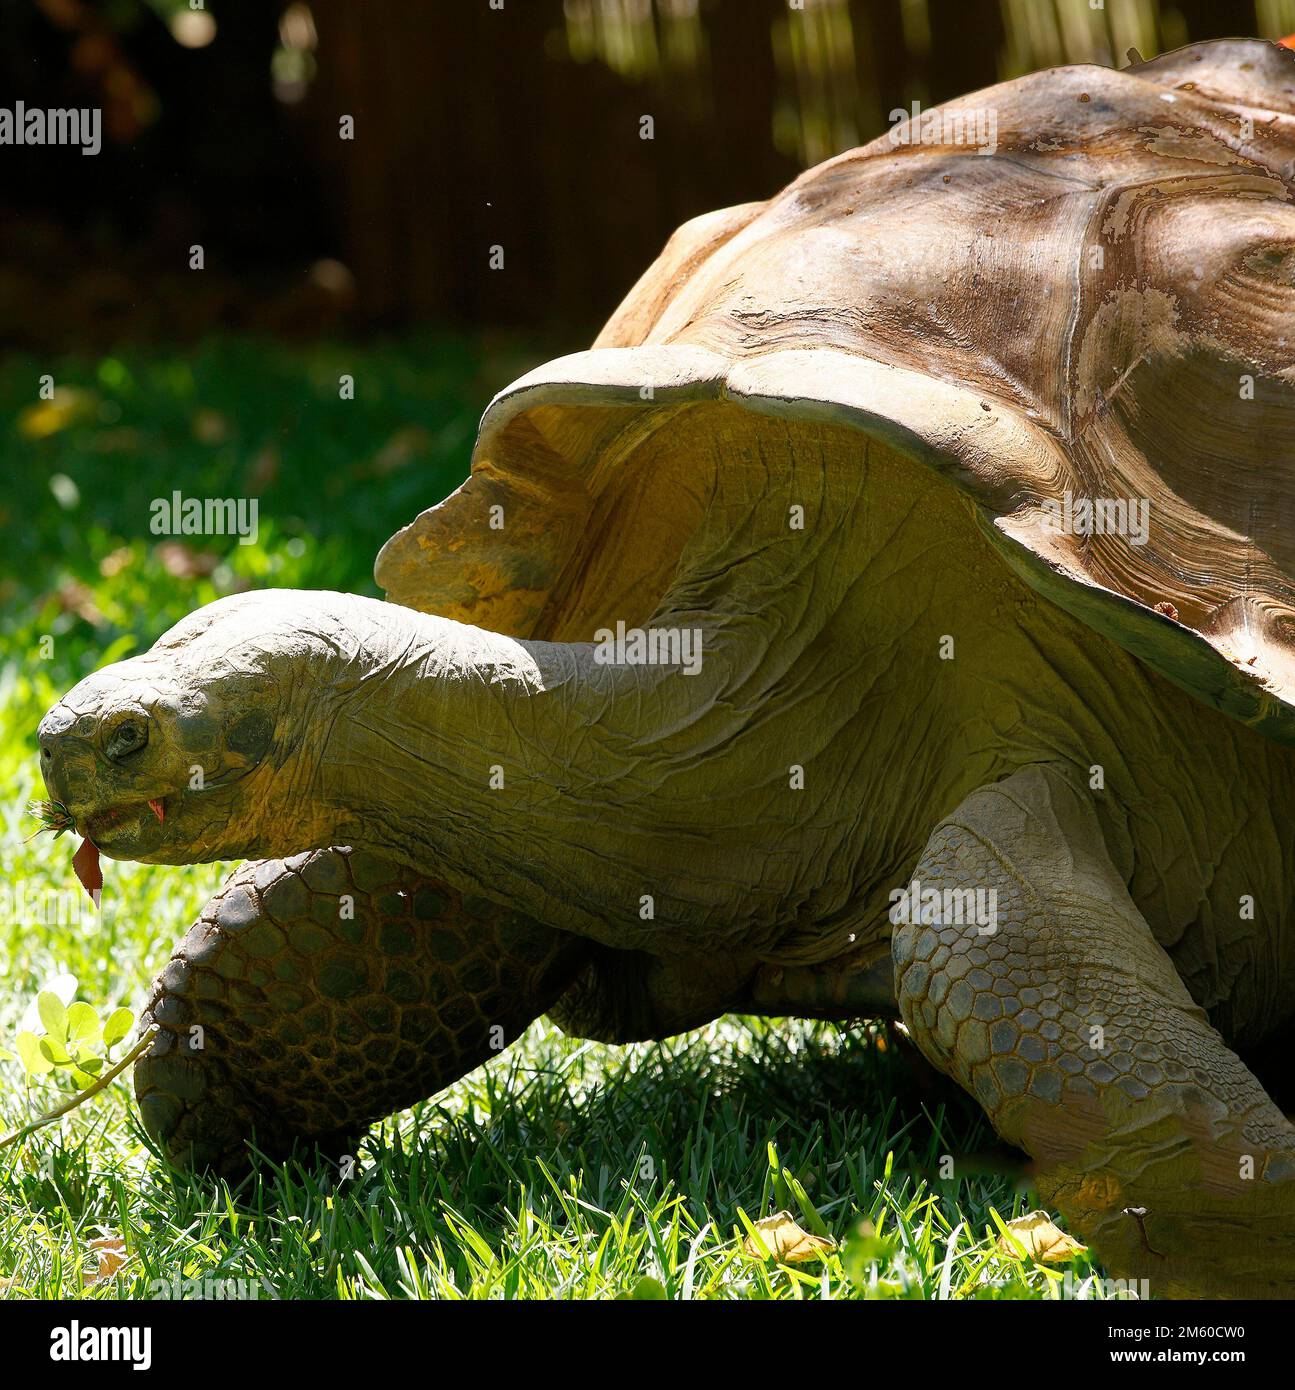 Closeup of a Galápagos tortoise or Galápagos giant tortoise Chelonoidis niger seen with a stretched neck and eating a leaf. Stock Photo